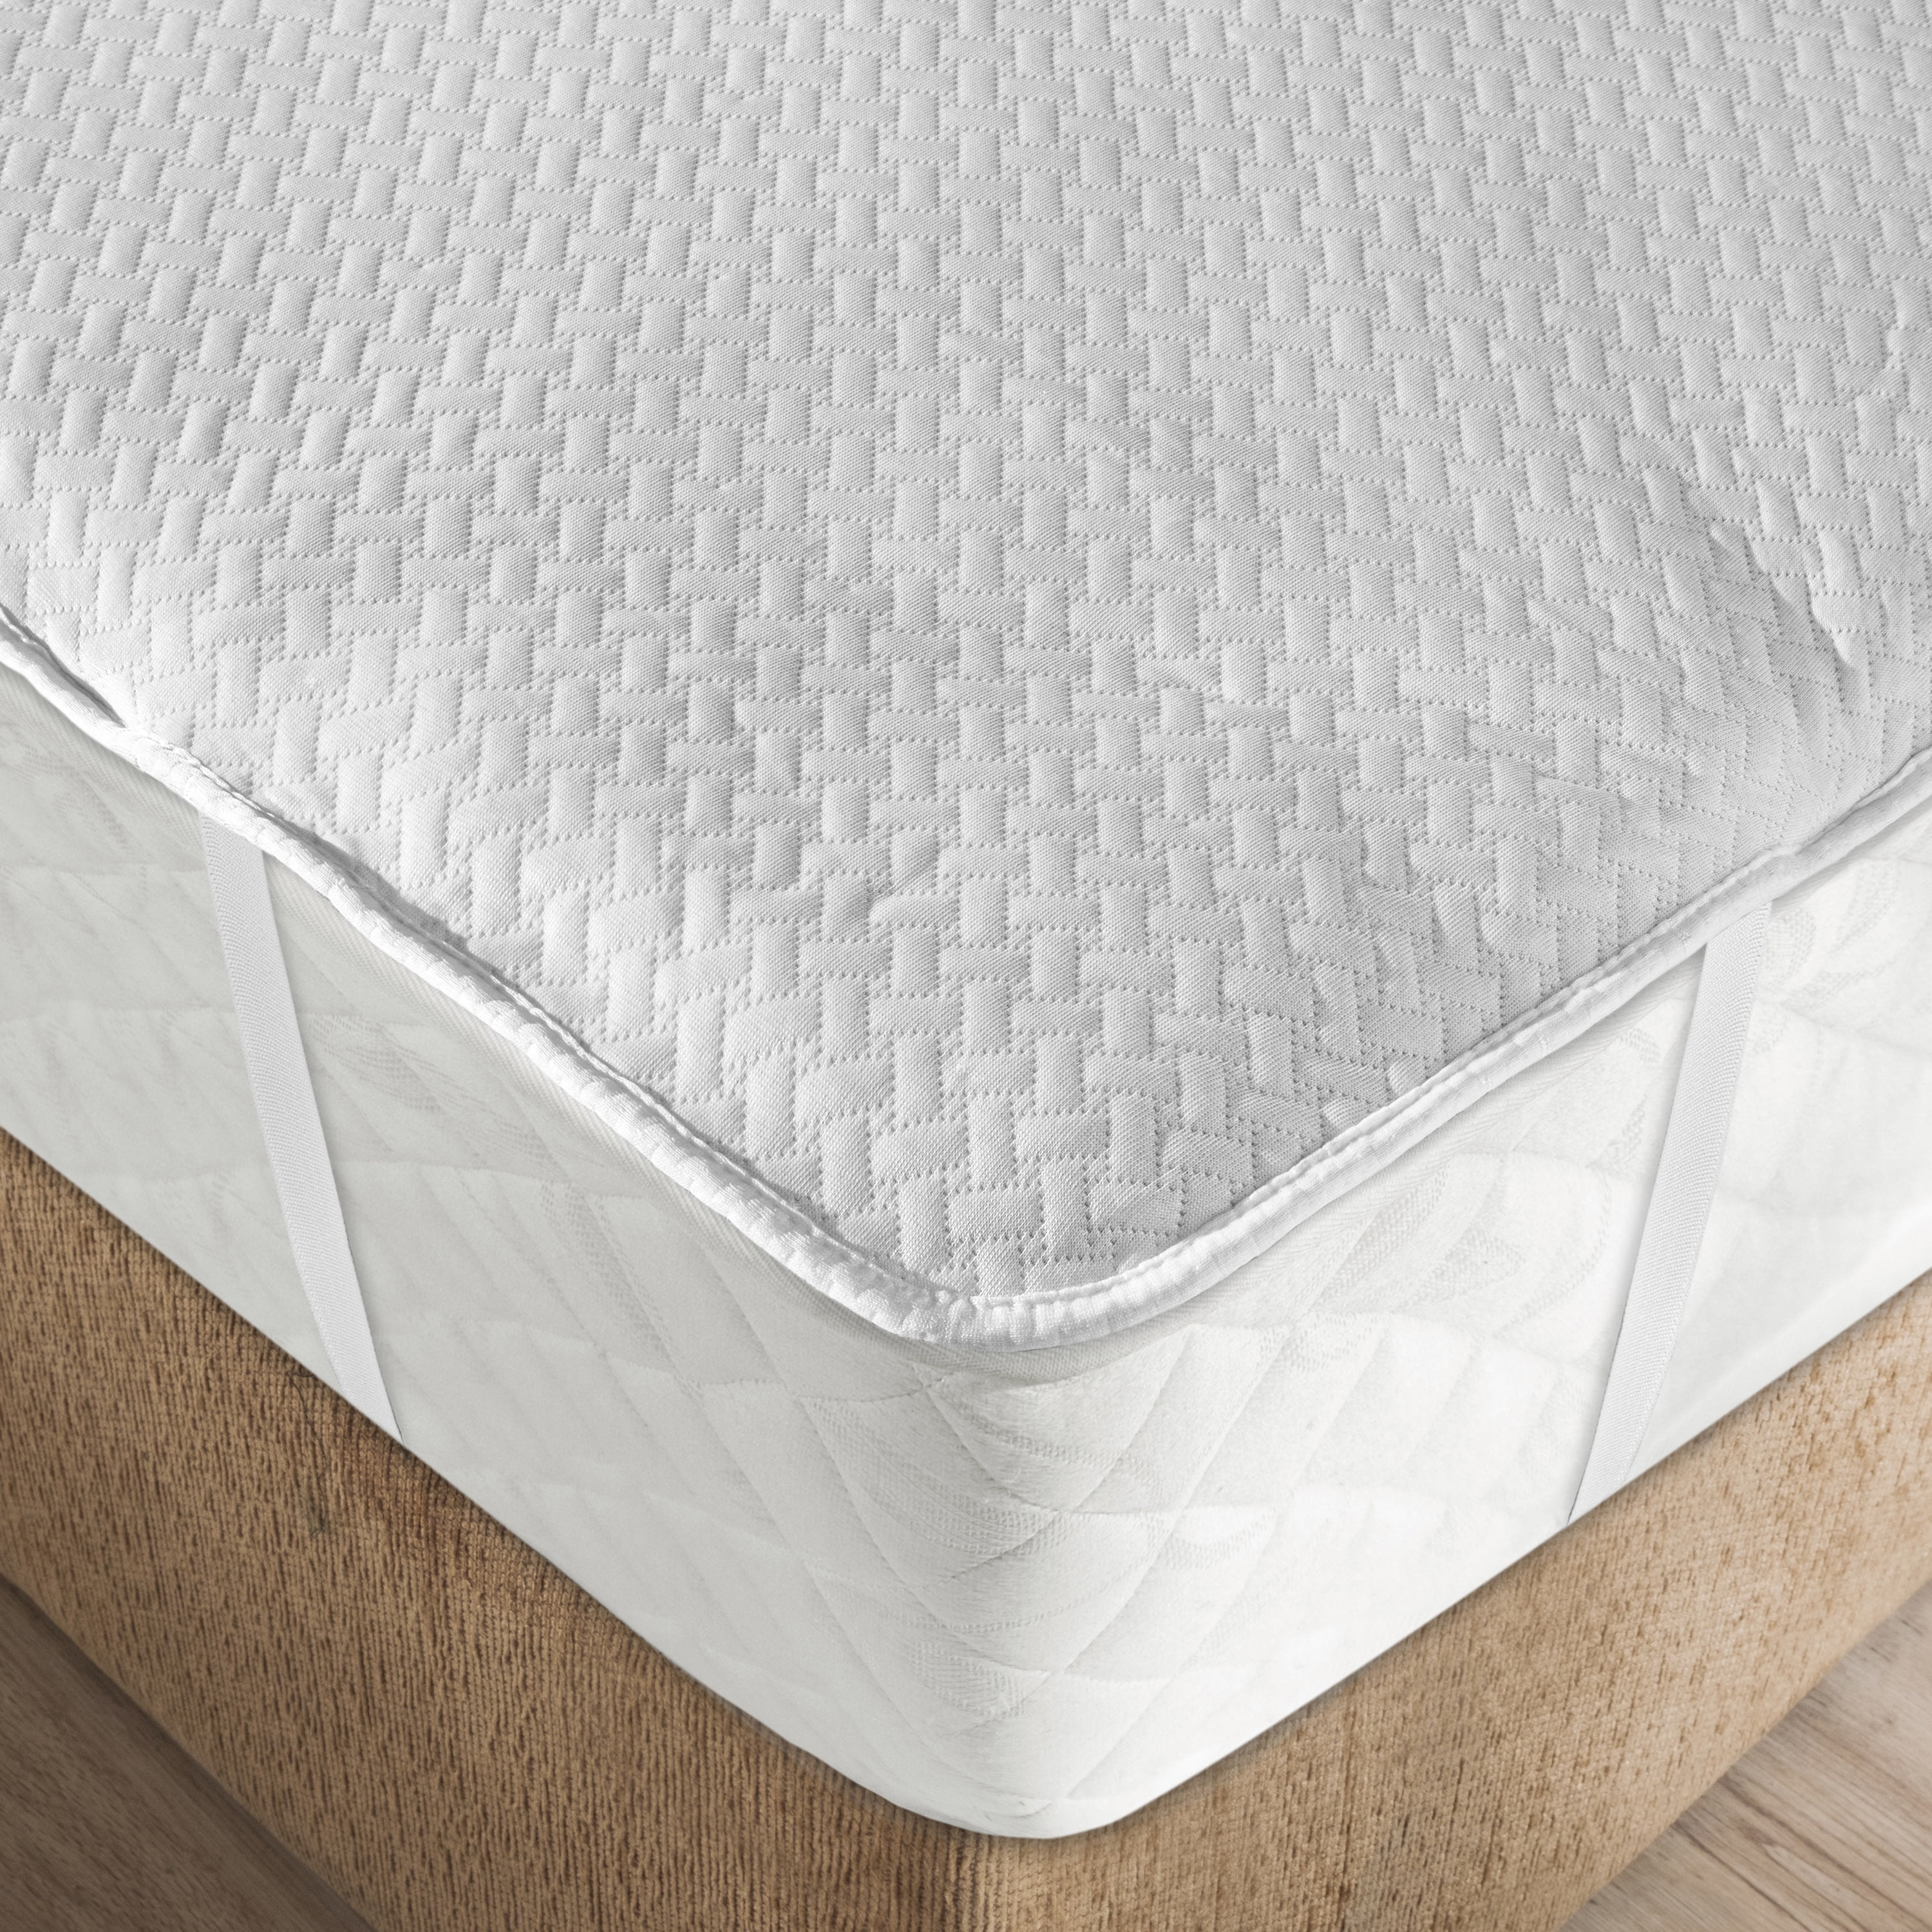 Details about   ELAFY Extra deep fitted MATTRESS PROTECTOR Bedding sheet set cover 